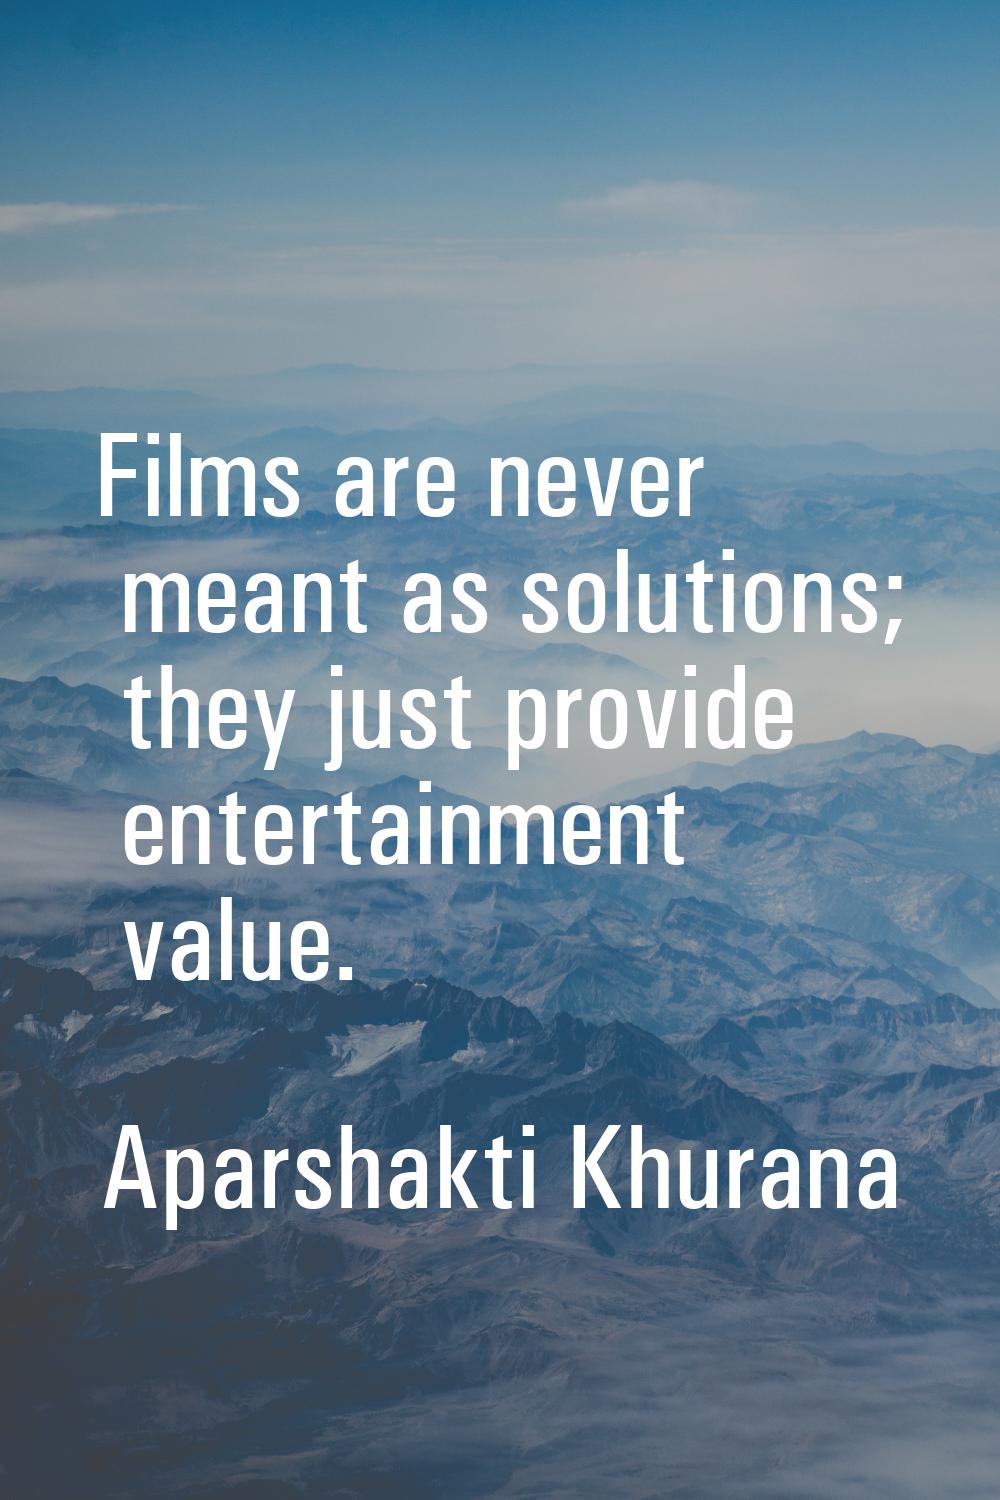 Films are never meant as solutions; they just provide entertainment value.